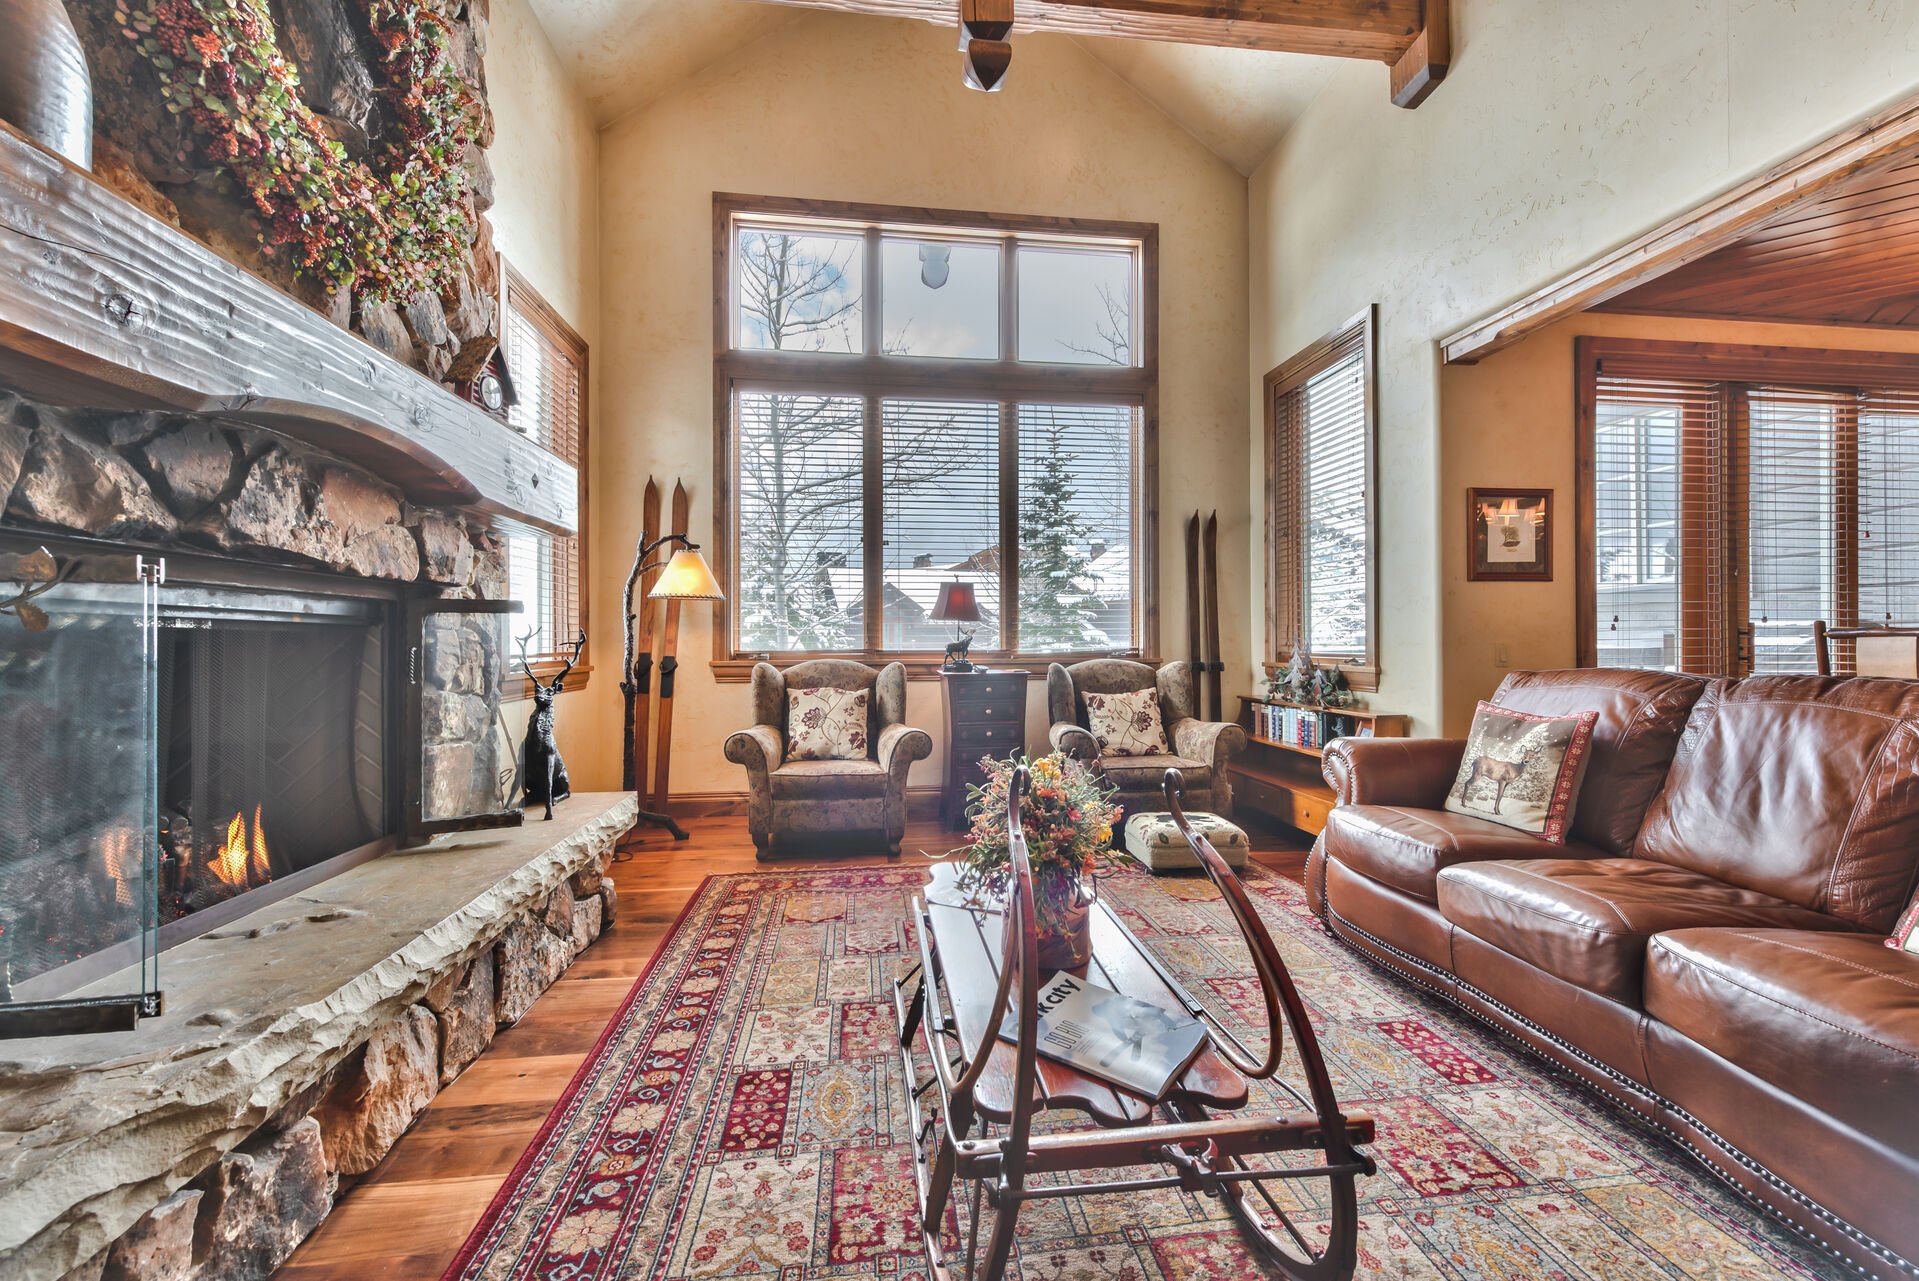 Main Level Living Room with Cozy Mountain Furnishings, Vaulted Ceilings, Warm Gas Fireplace, and Large Windows for Natural Light